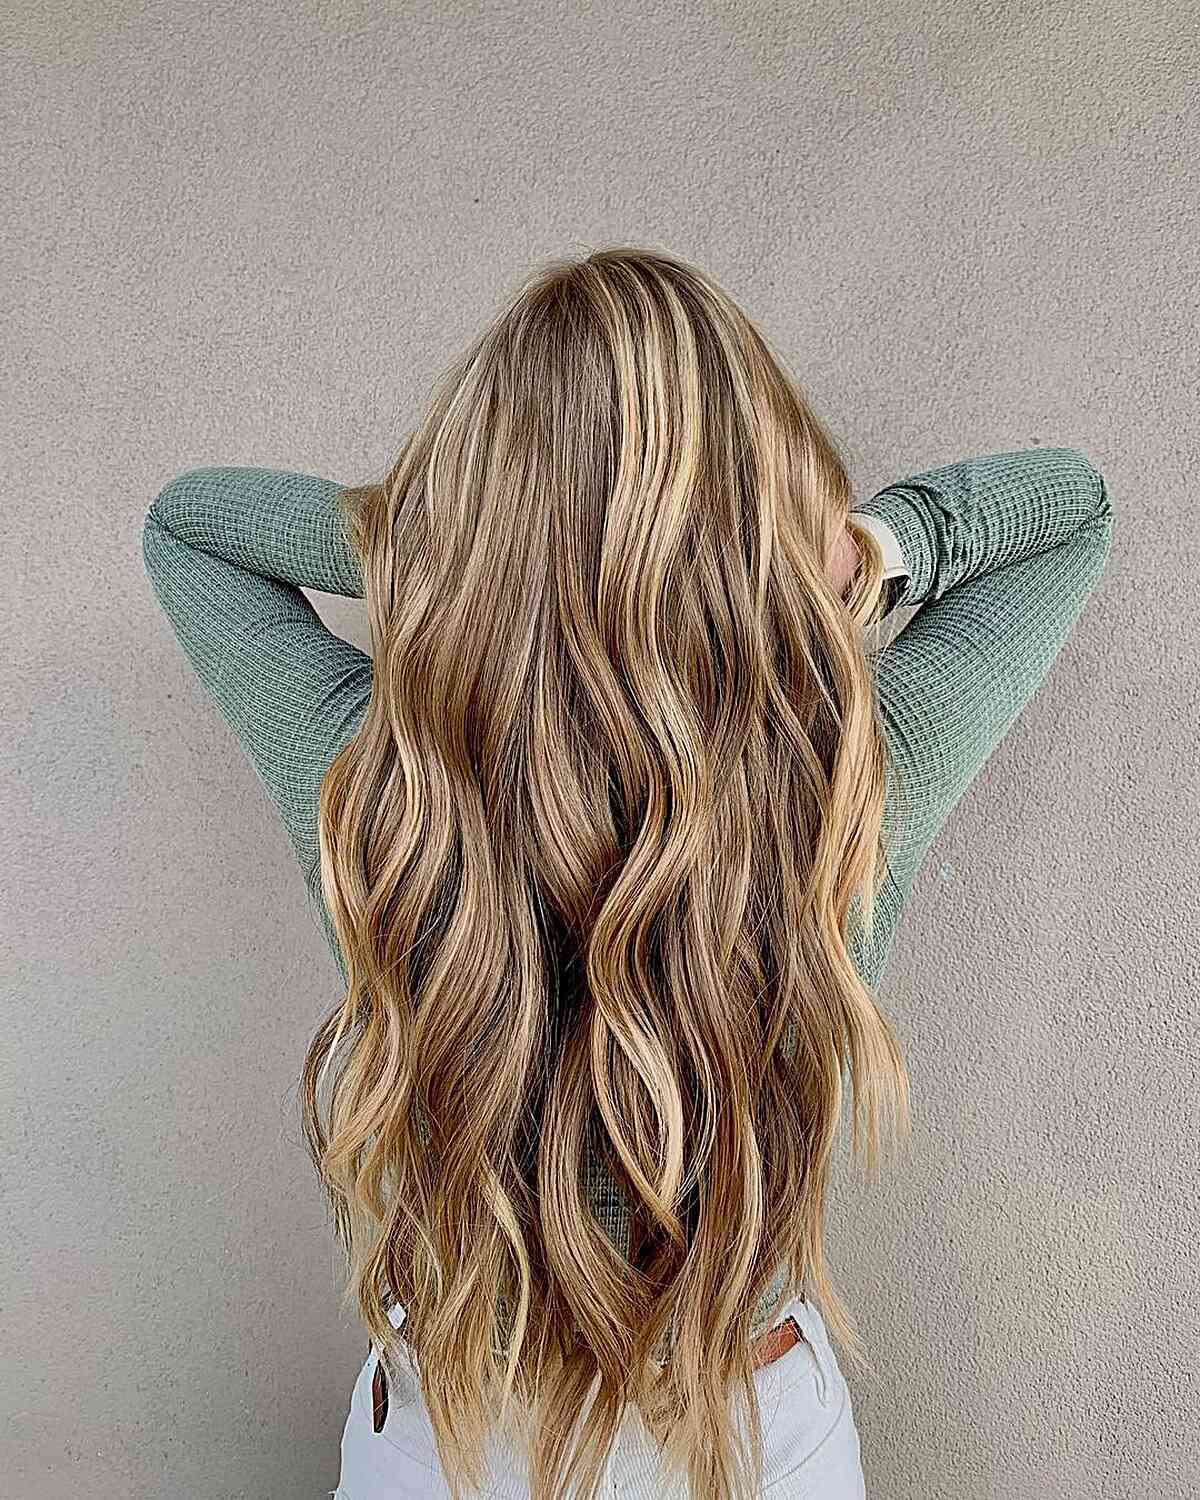 Warm Dimensional Bronde Balayage Hair with Long Waves and Layers